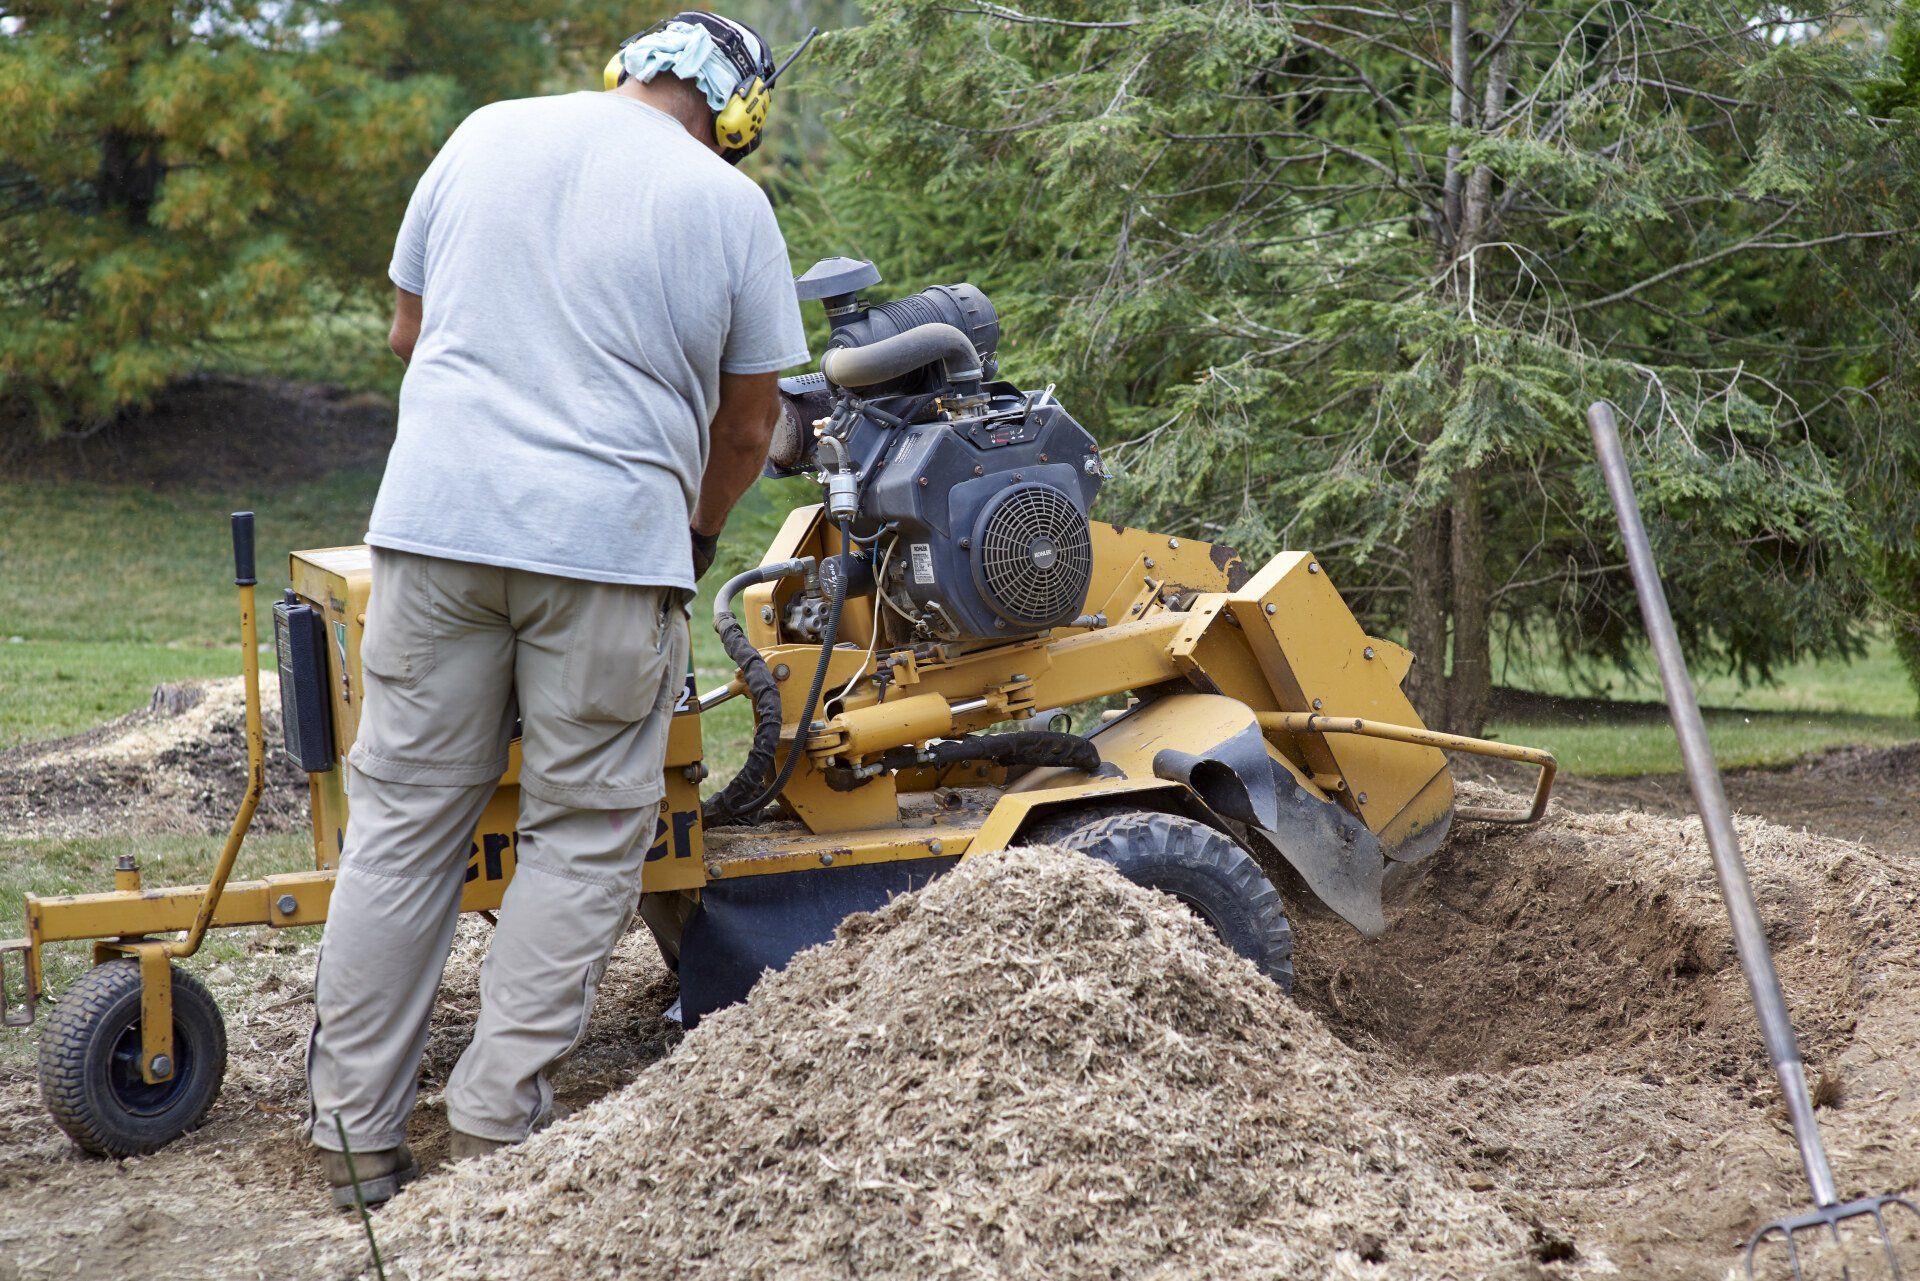 worker finishing up with stump grinder for stump removal